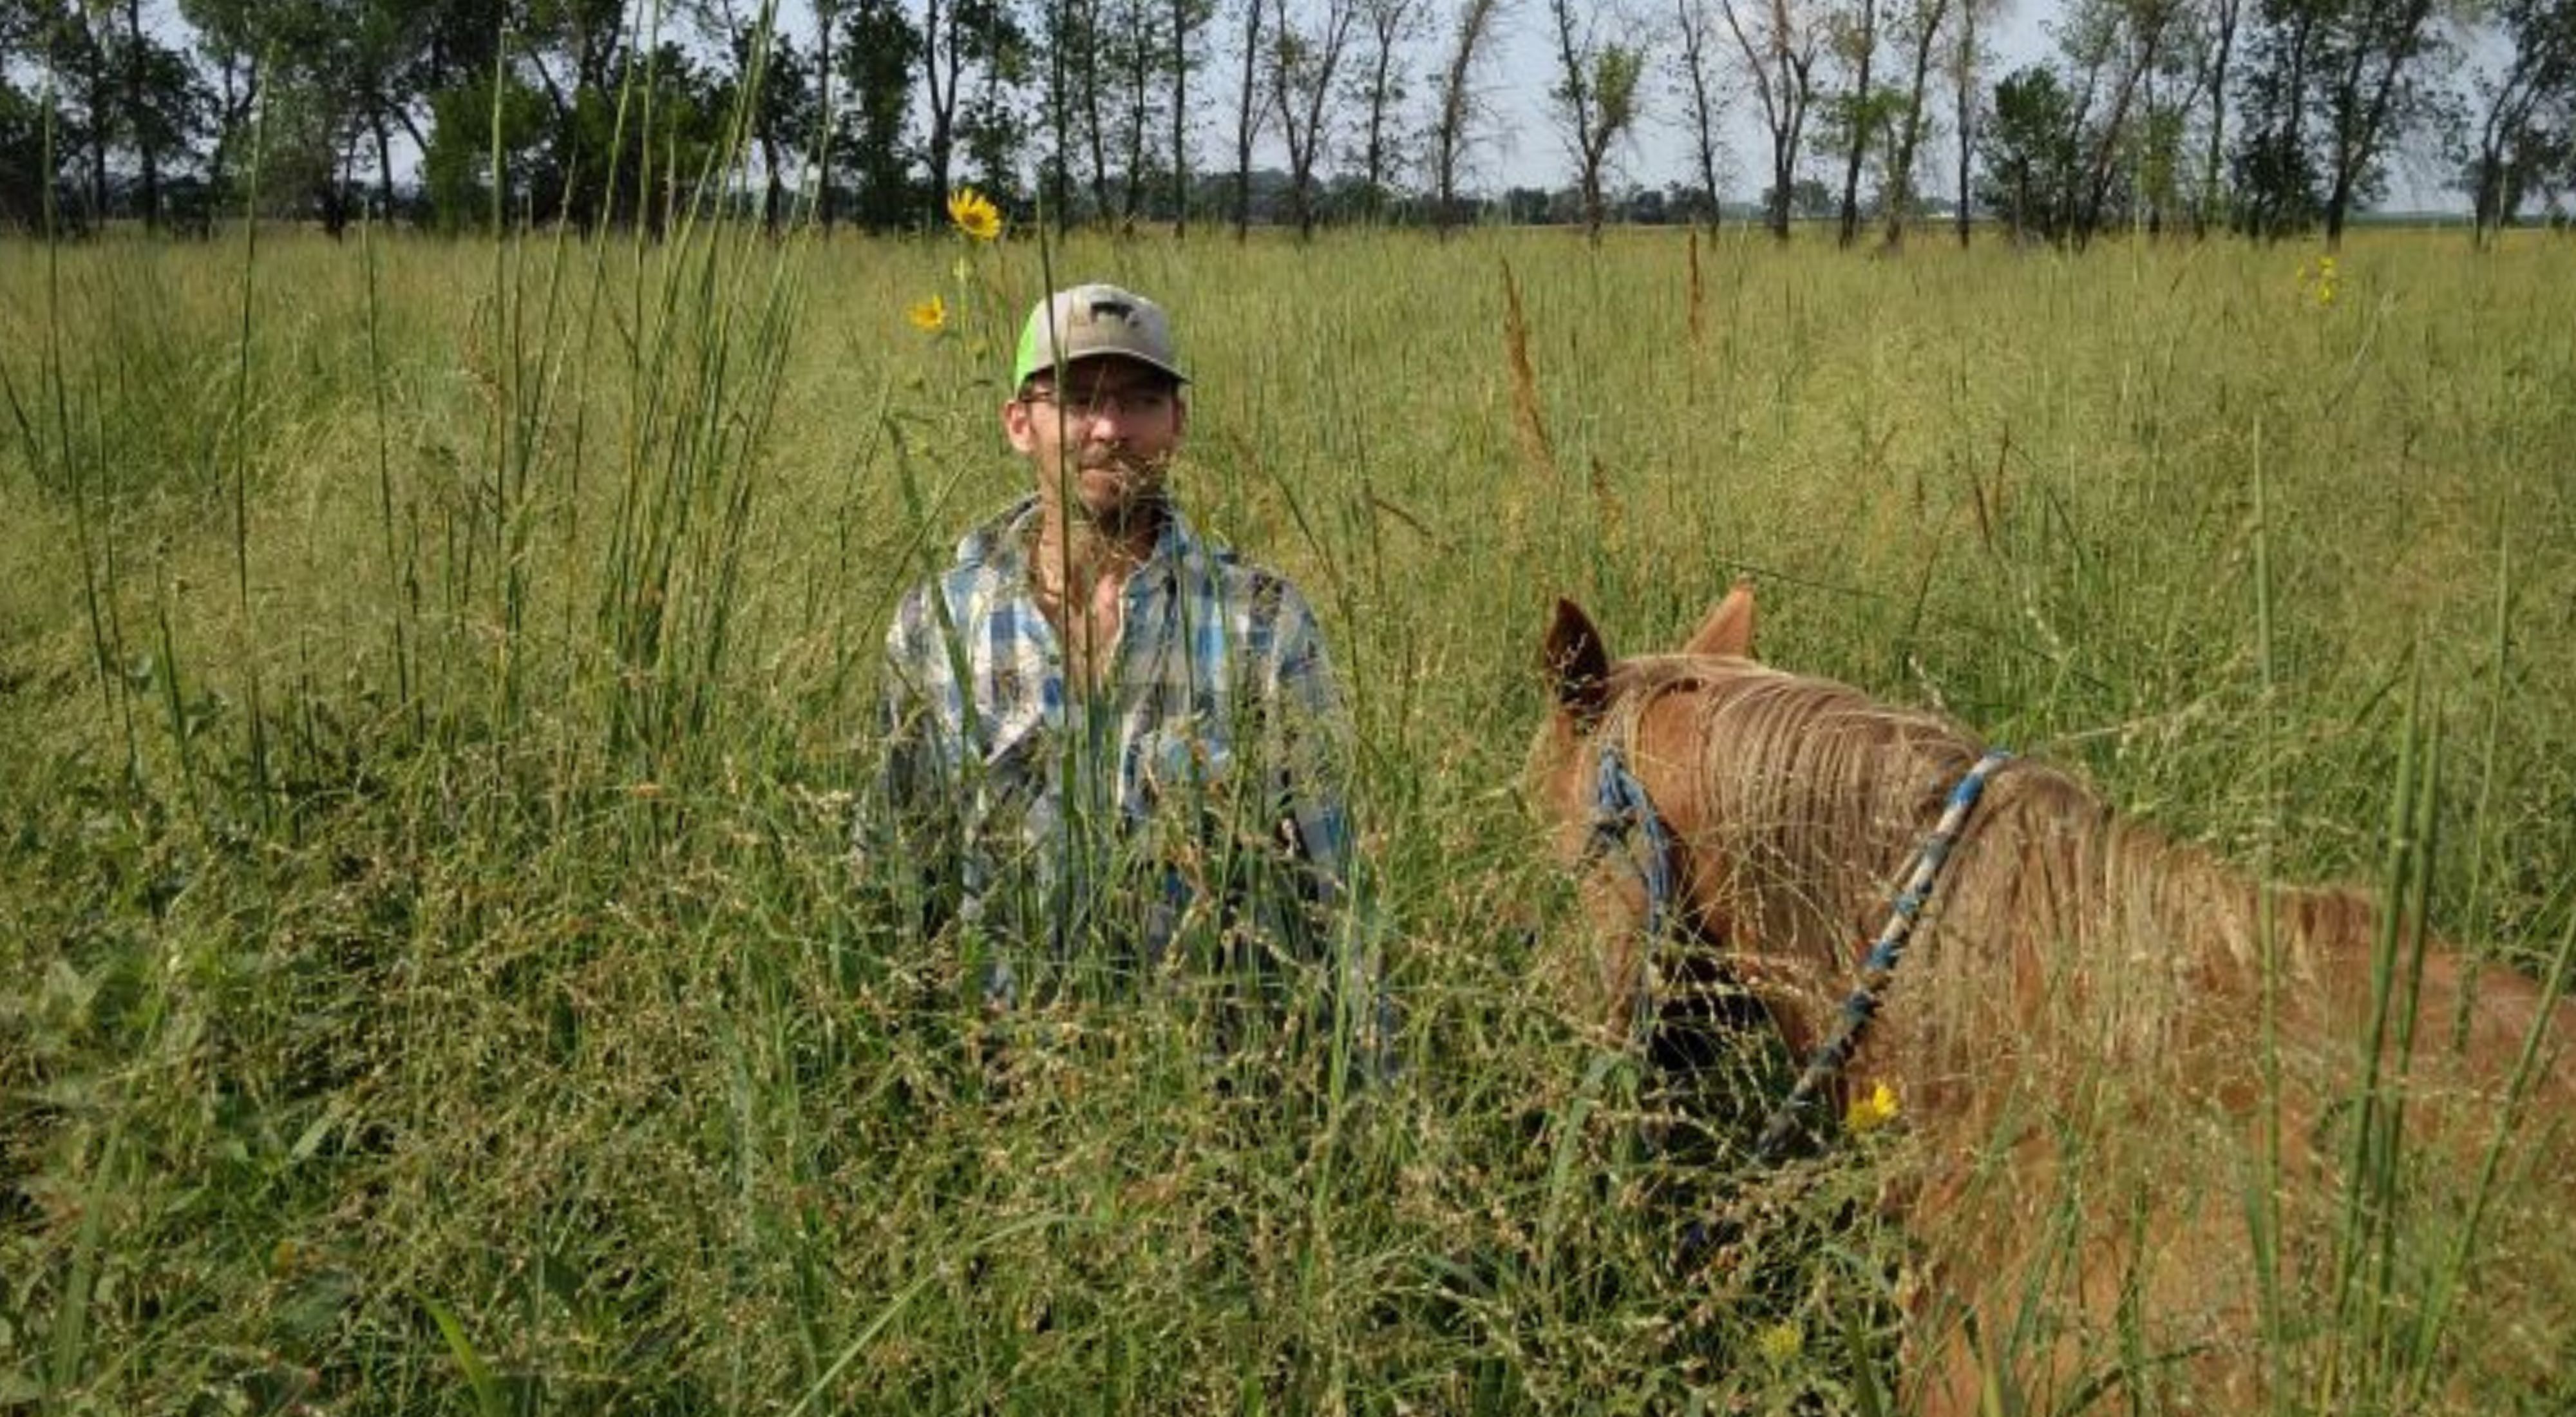 A man and a horse stand in a field with grass towering over their heads.